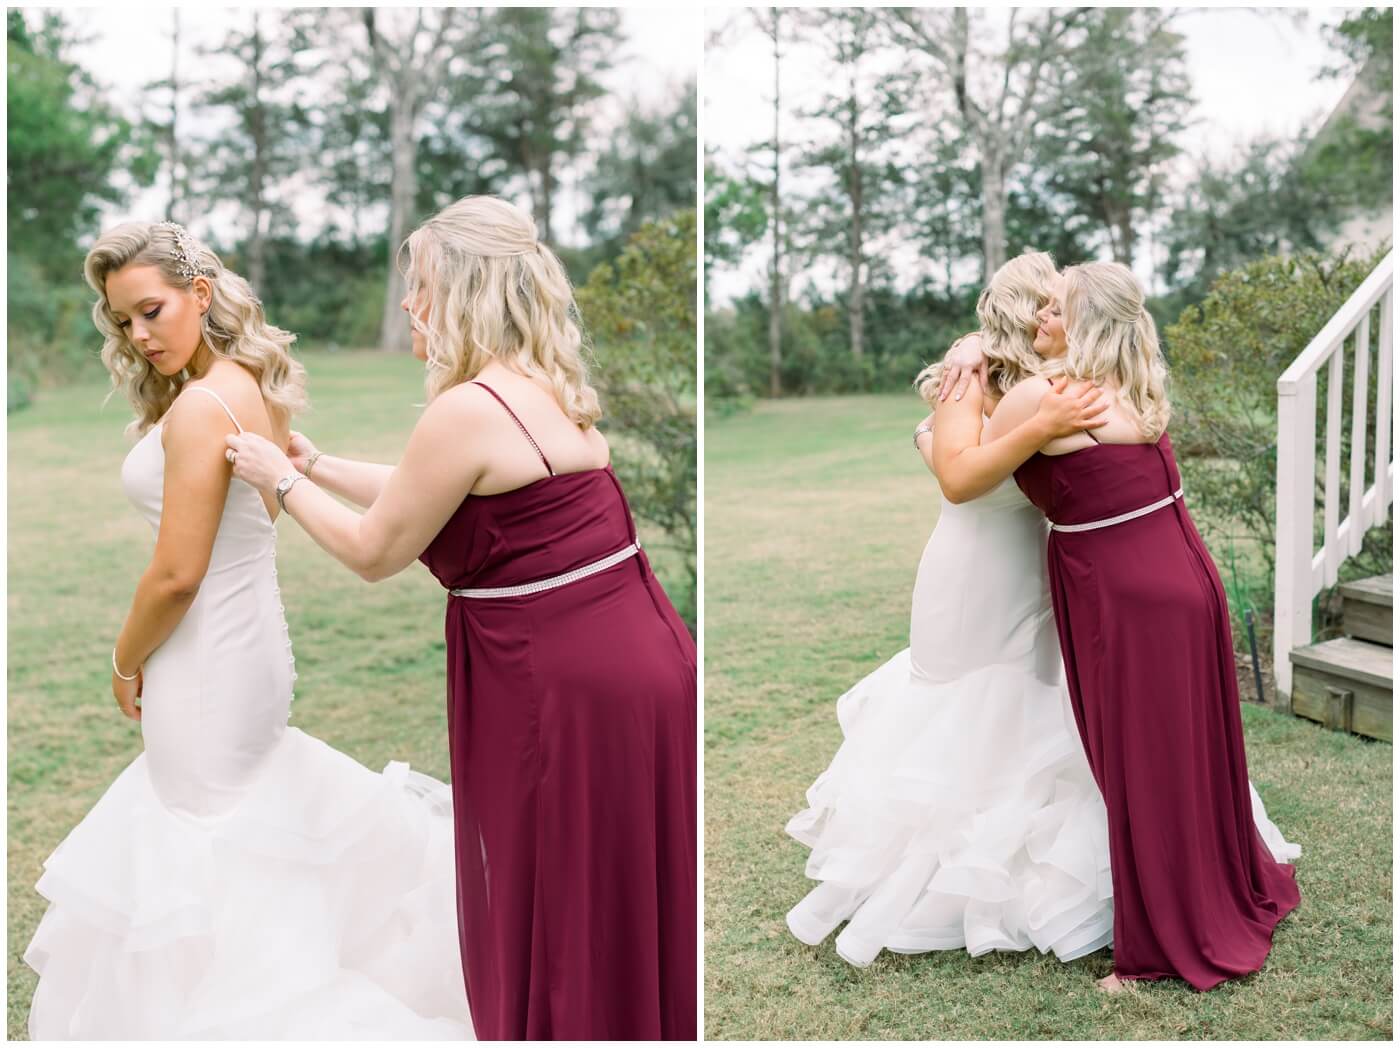 Houston Wedding at The Vine | a bride's mom is helping the bride into her wedding dress